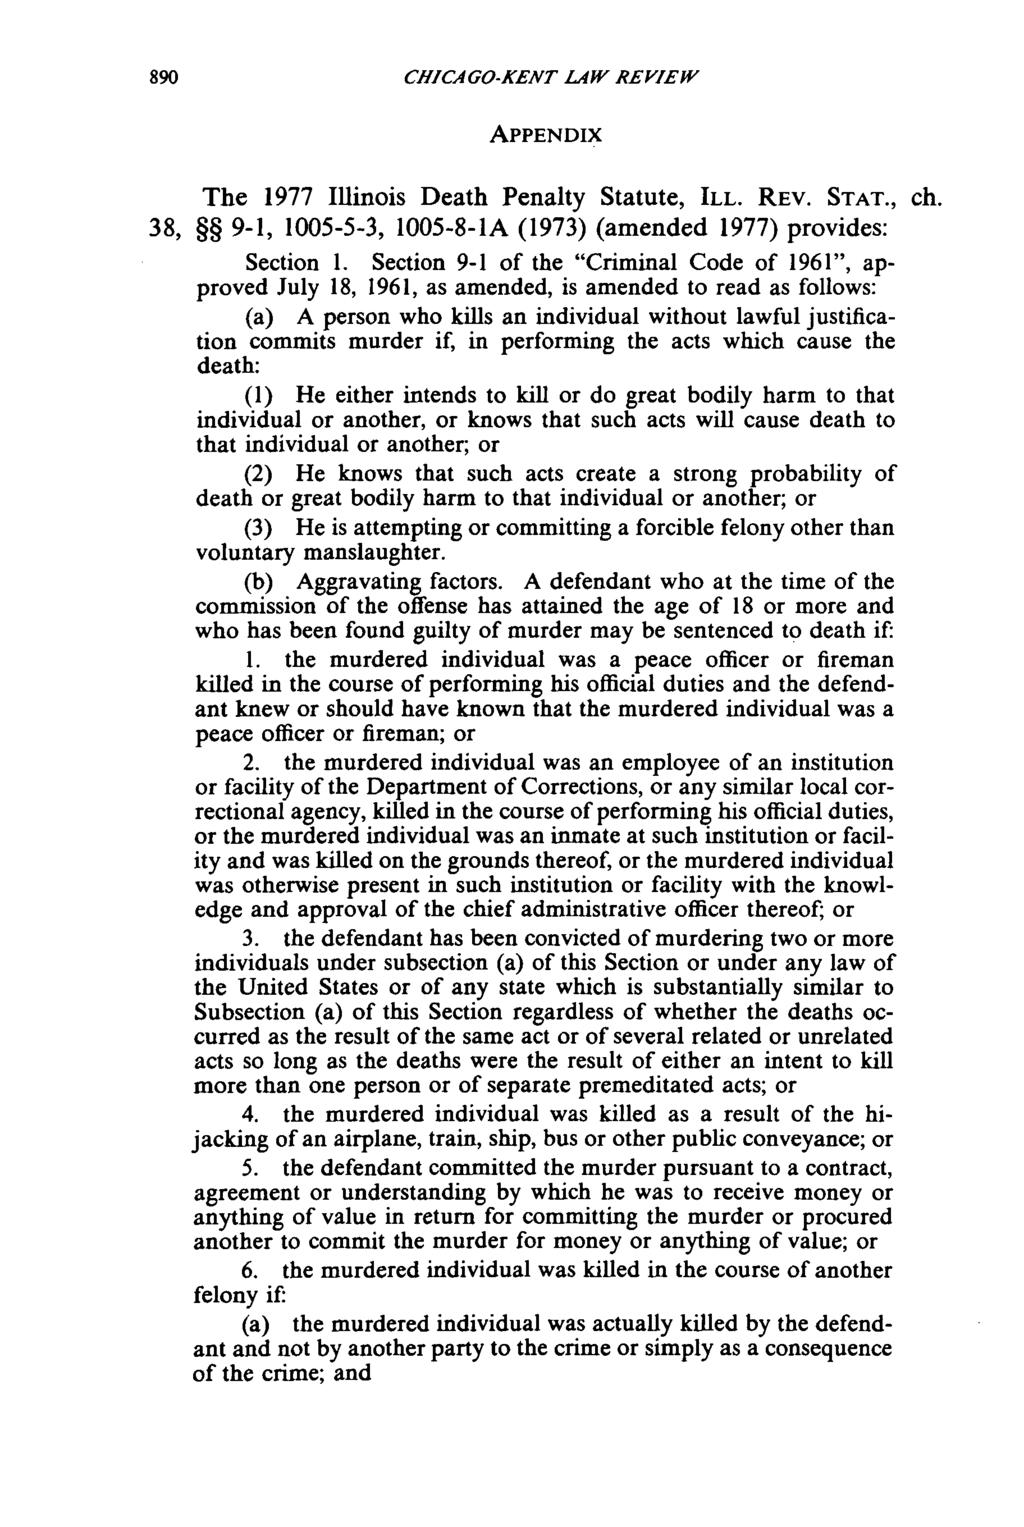 CHICAGO-KENT LAW REVIEW APPENDIX The 1977 Illinois Death Penalty Statute, ILL. REV. STAT., 38, 9-1, 1005-5-3, 1005-8-lA (1973) (amended 1977) provides: Section 1.